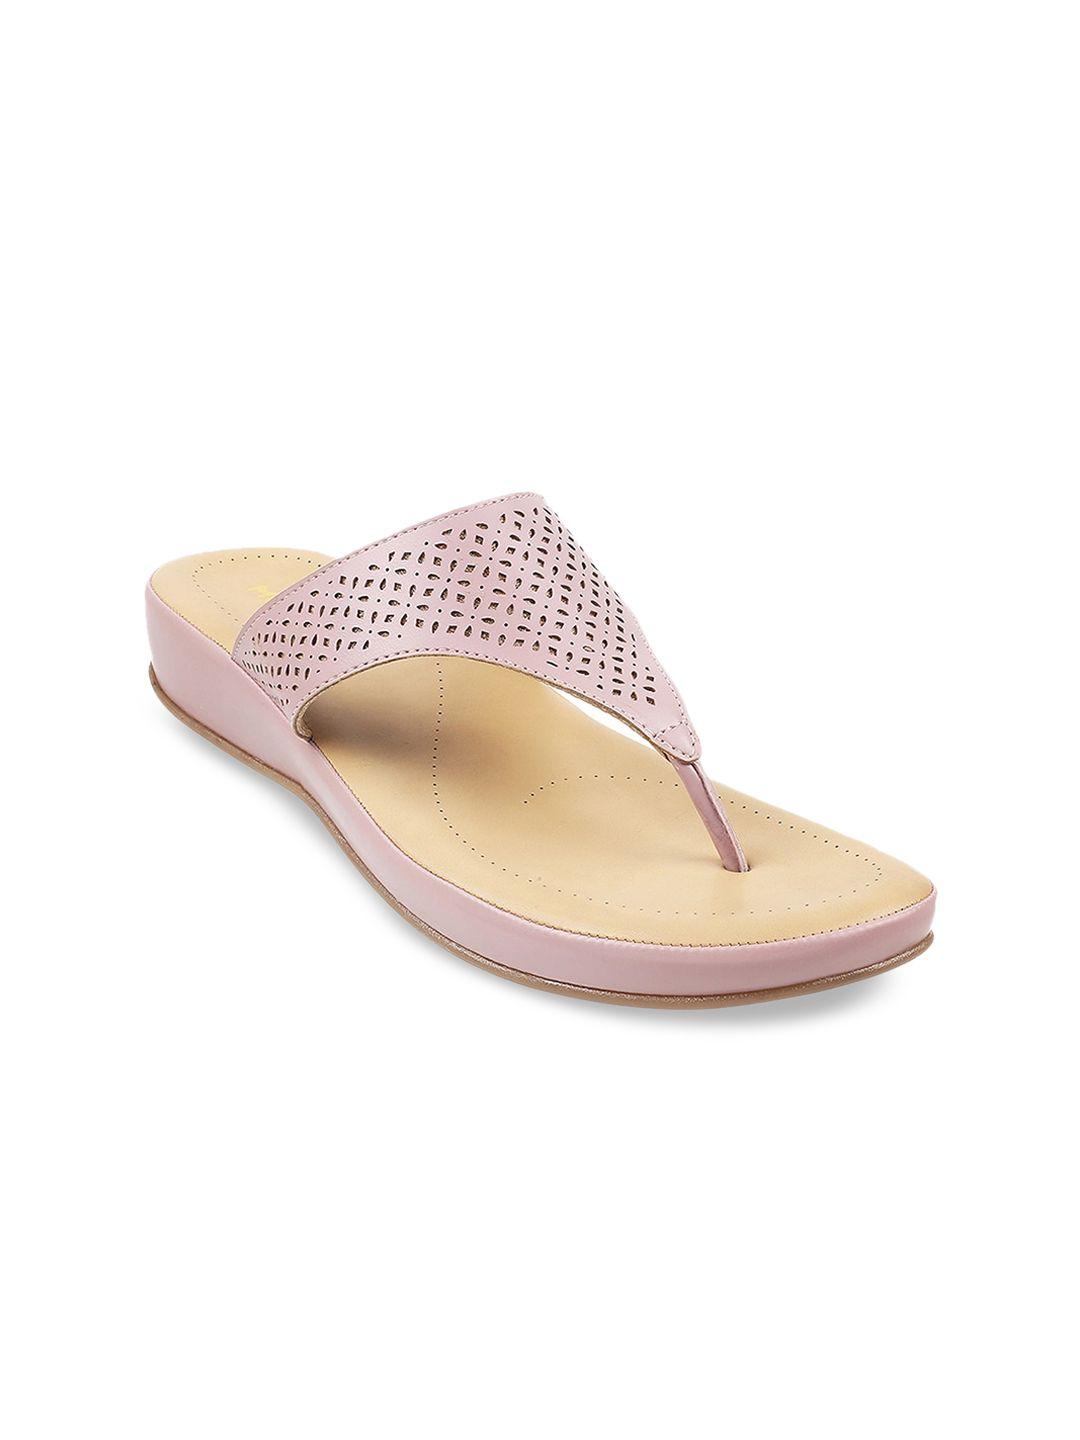 mochi women textured t-strap flats with laser cuts